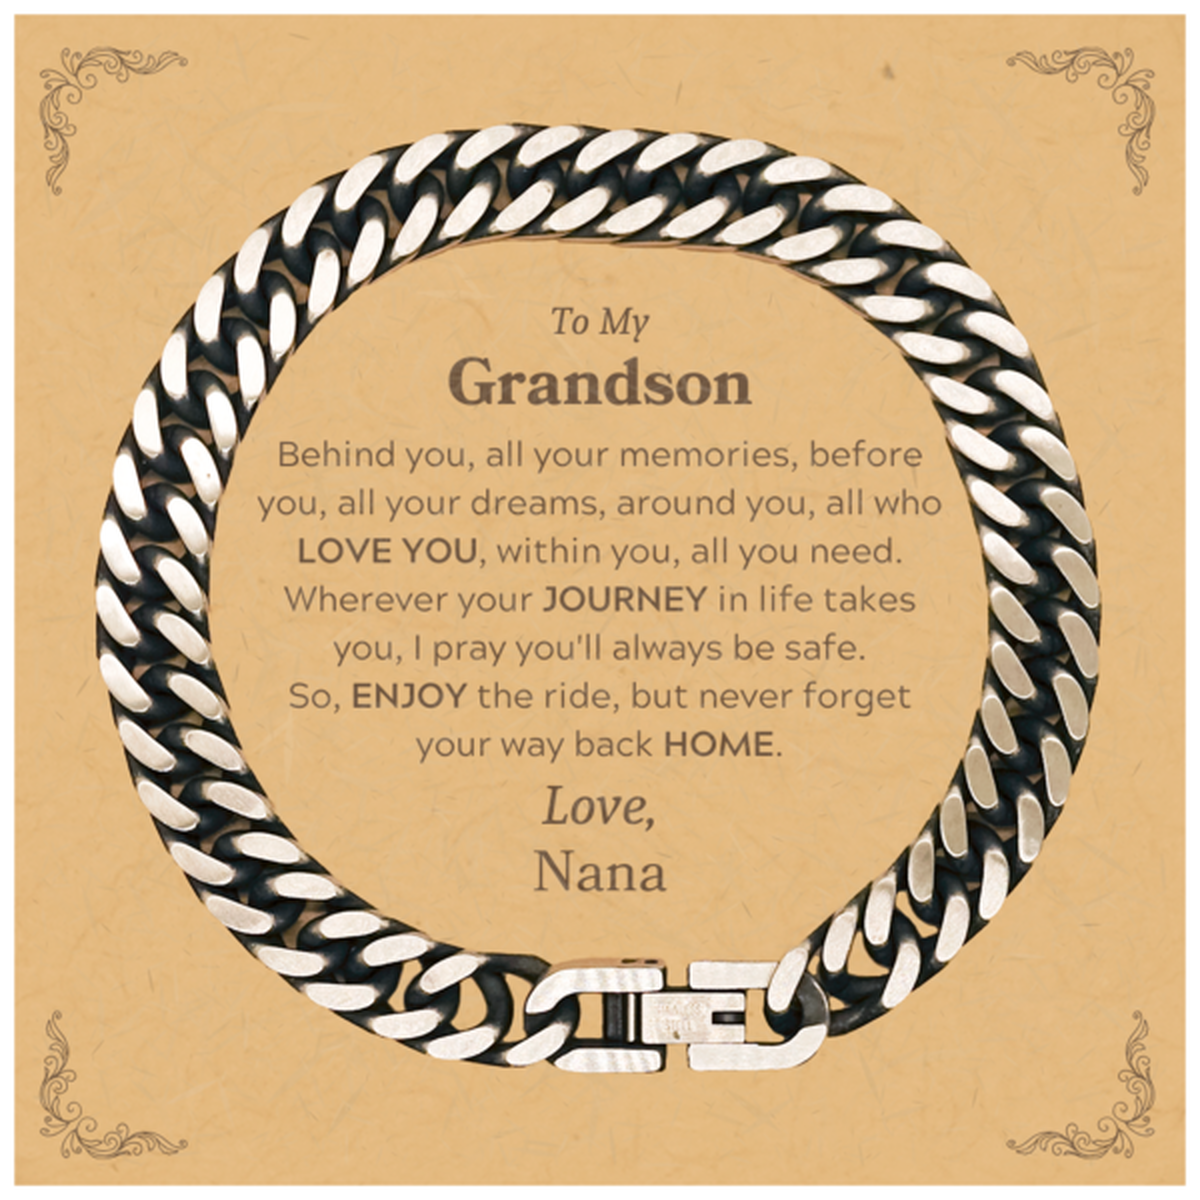 To My Grandson Graduation Gifts from Nana, Grandson Cuban Link Chain Bracelet Christmas Birthday Gifts for Grandson Behind you, all your memories, before you, all your dreams. Love, Nana